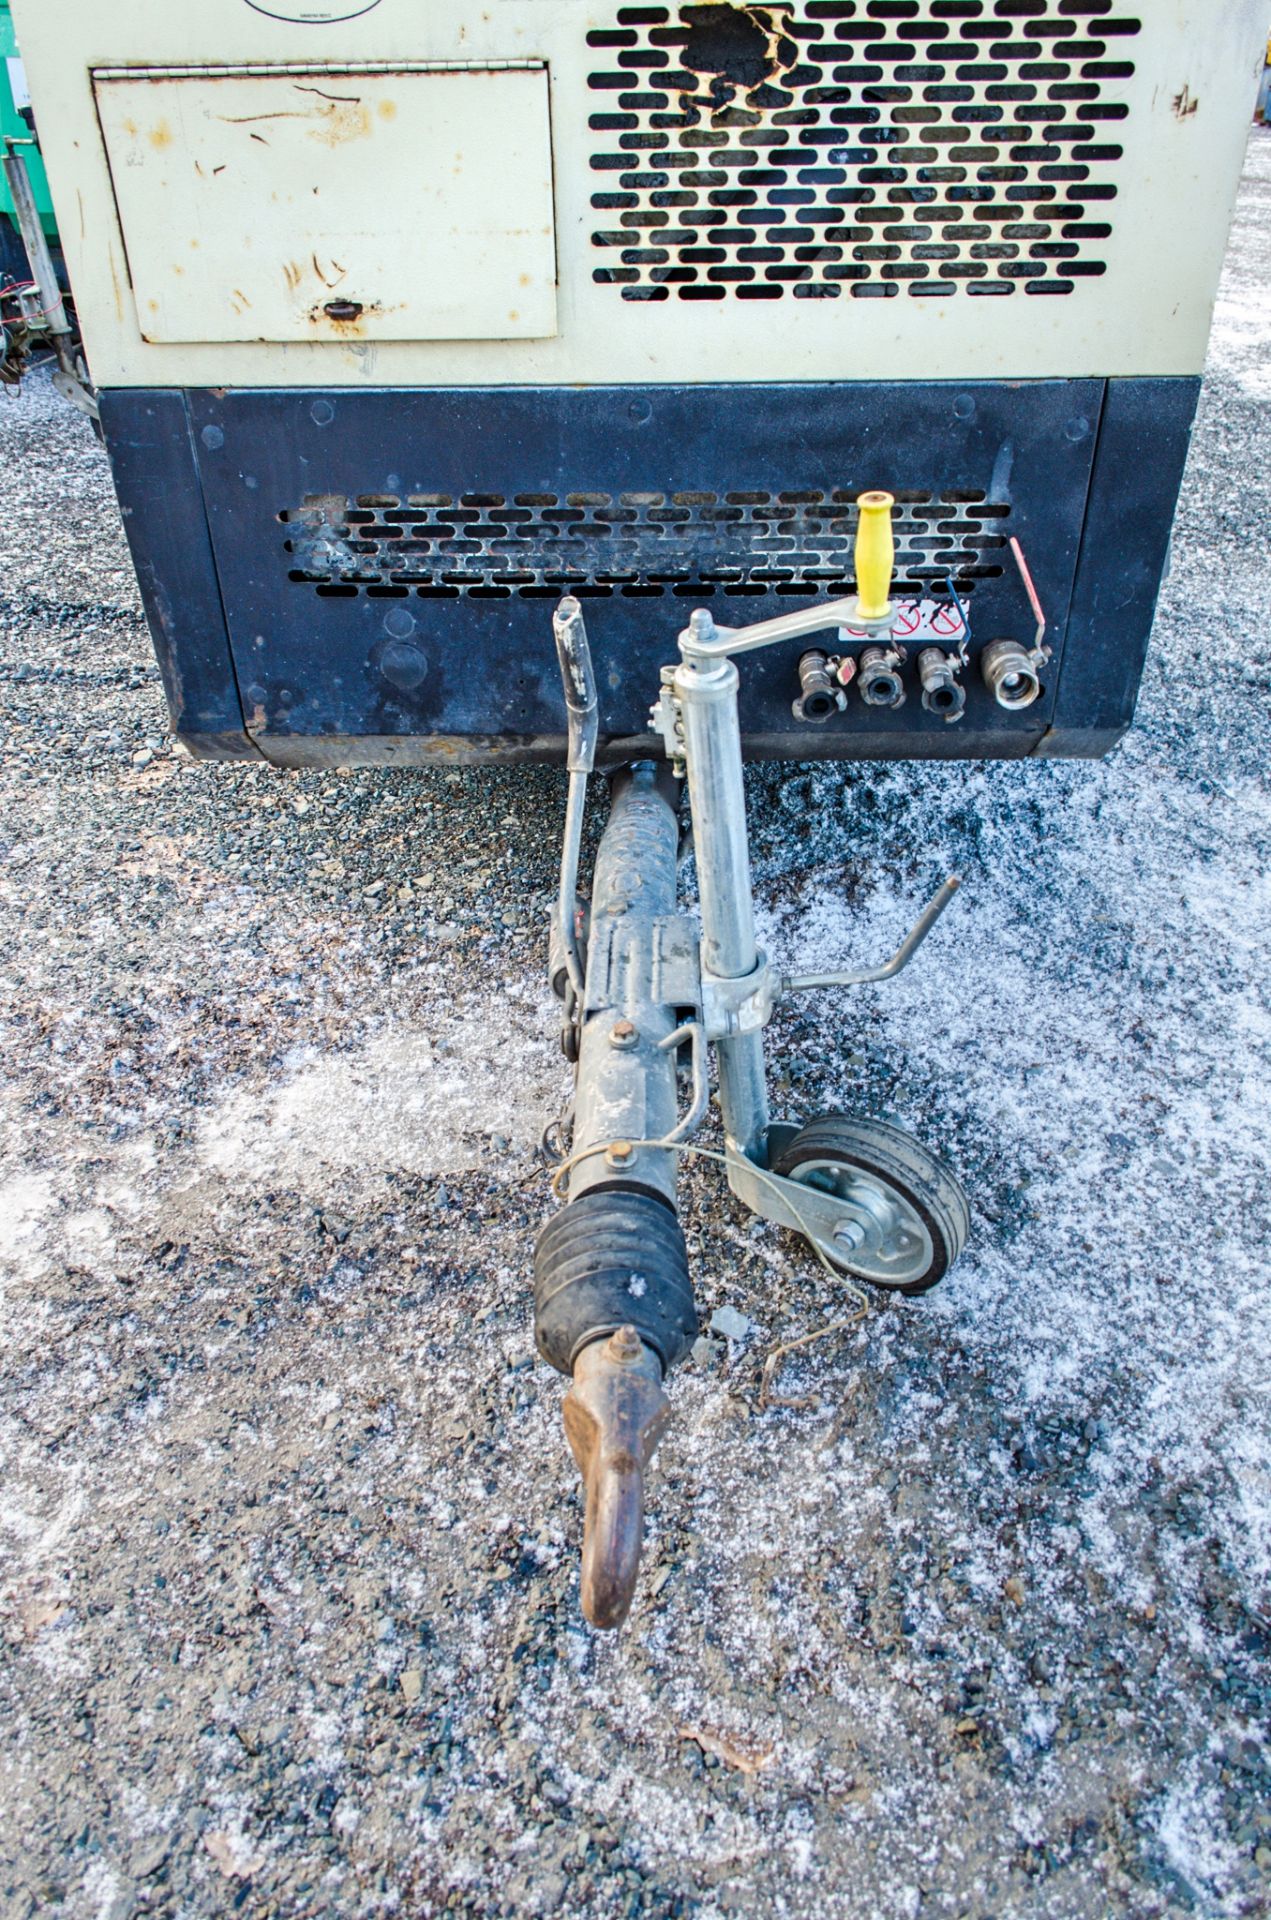 Ingersoll Rand 7/71 diesel driven air compressor Year: 2006 S/N: 521720 Recorded Hours: 3503 - Image 3 of 6